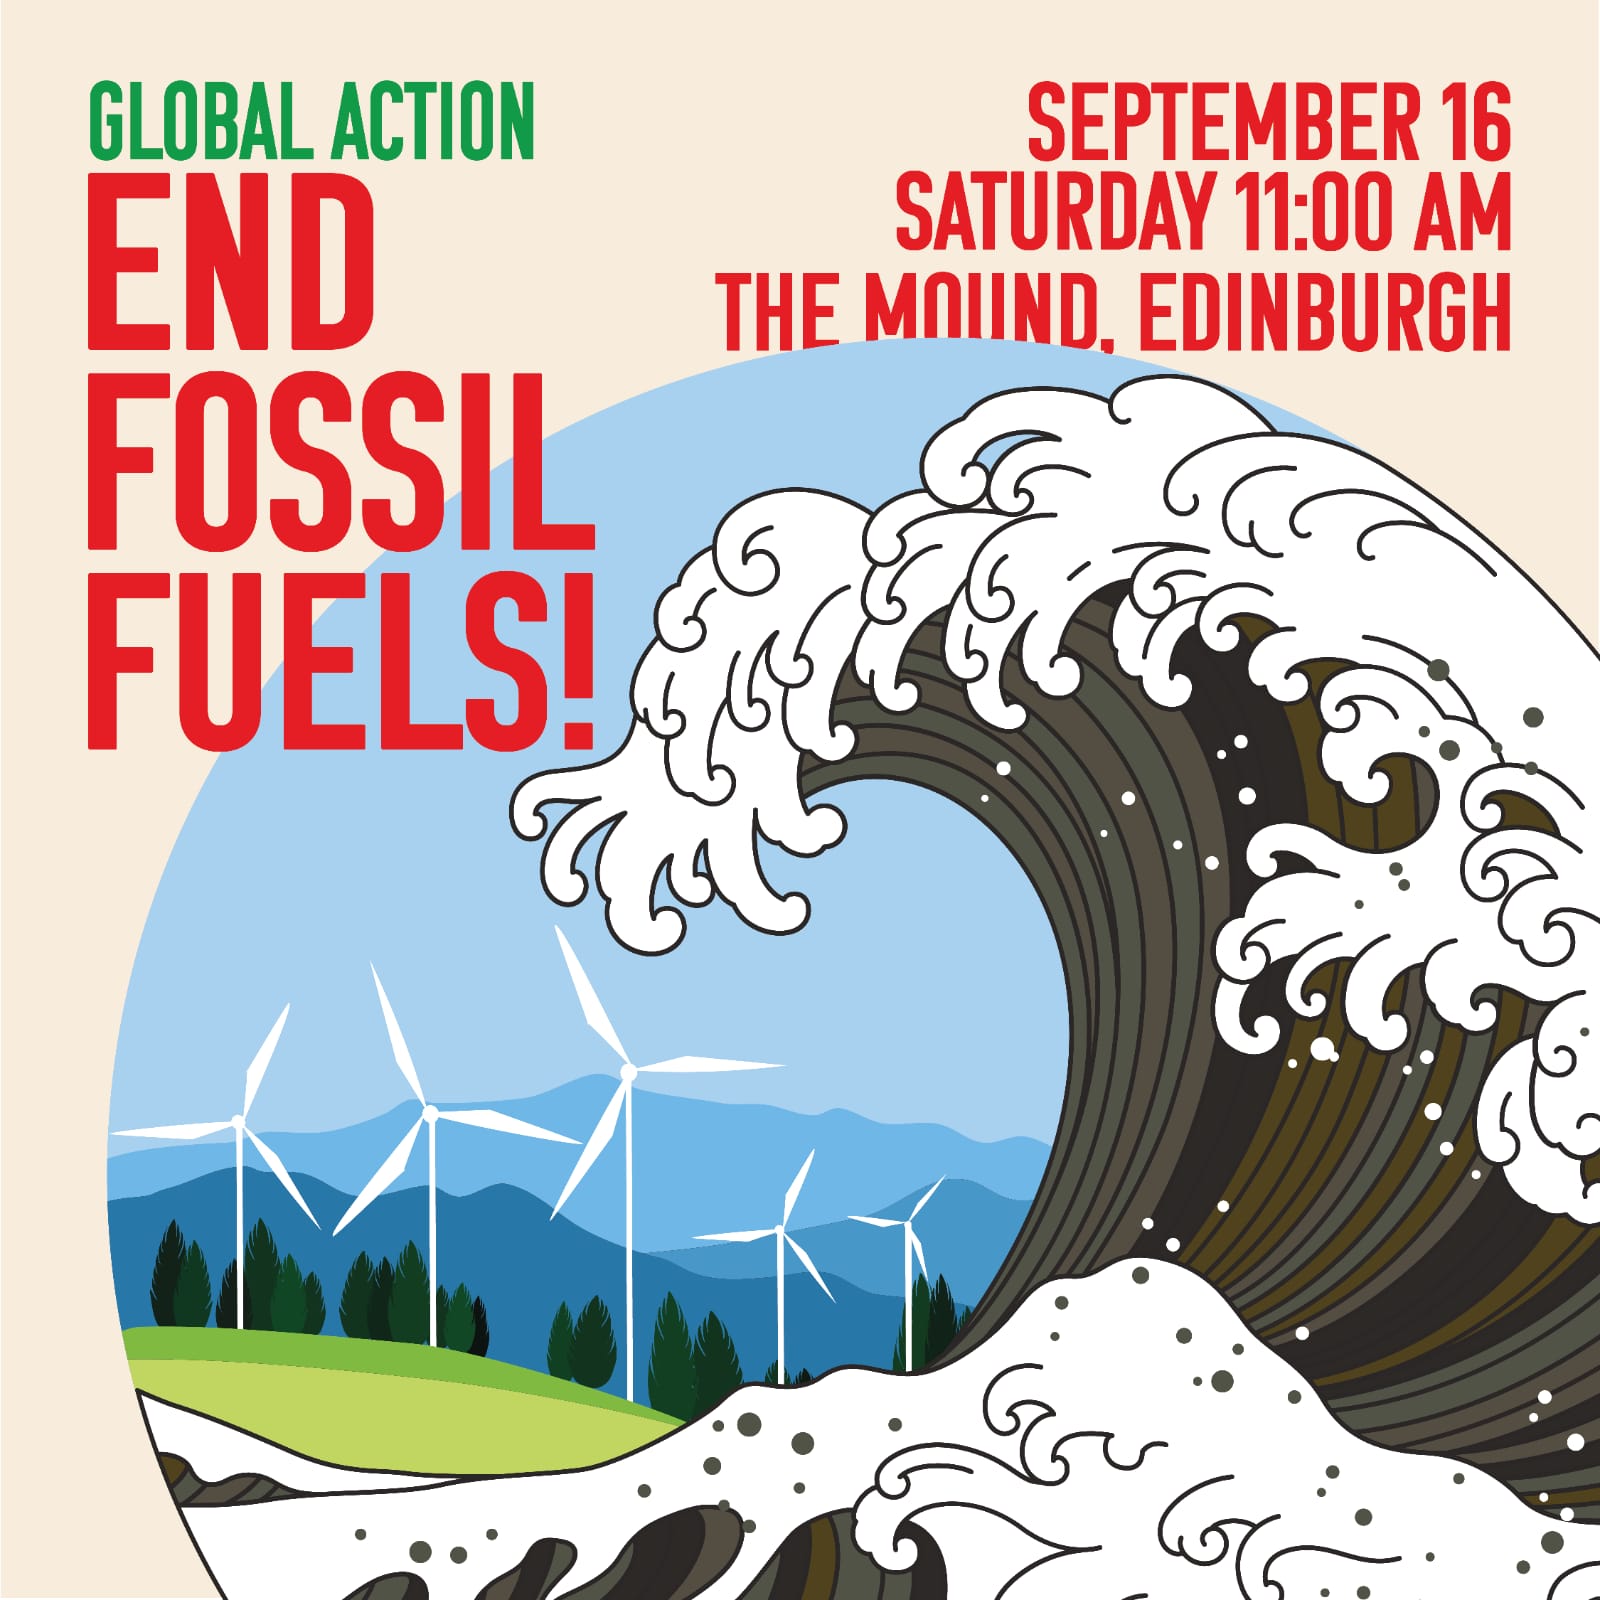 Global Action to End Fossil Fuels: September 16, Saturday 11:10 AM, The Mound, Edinburgh